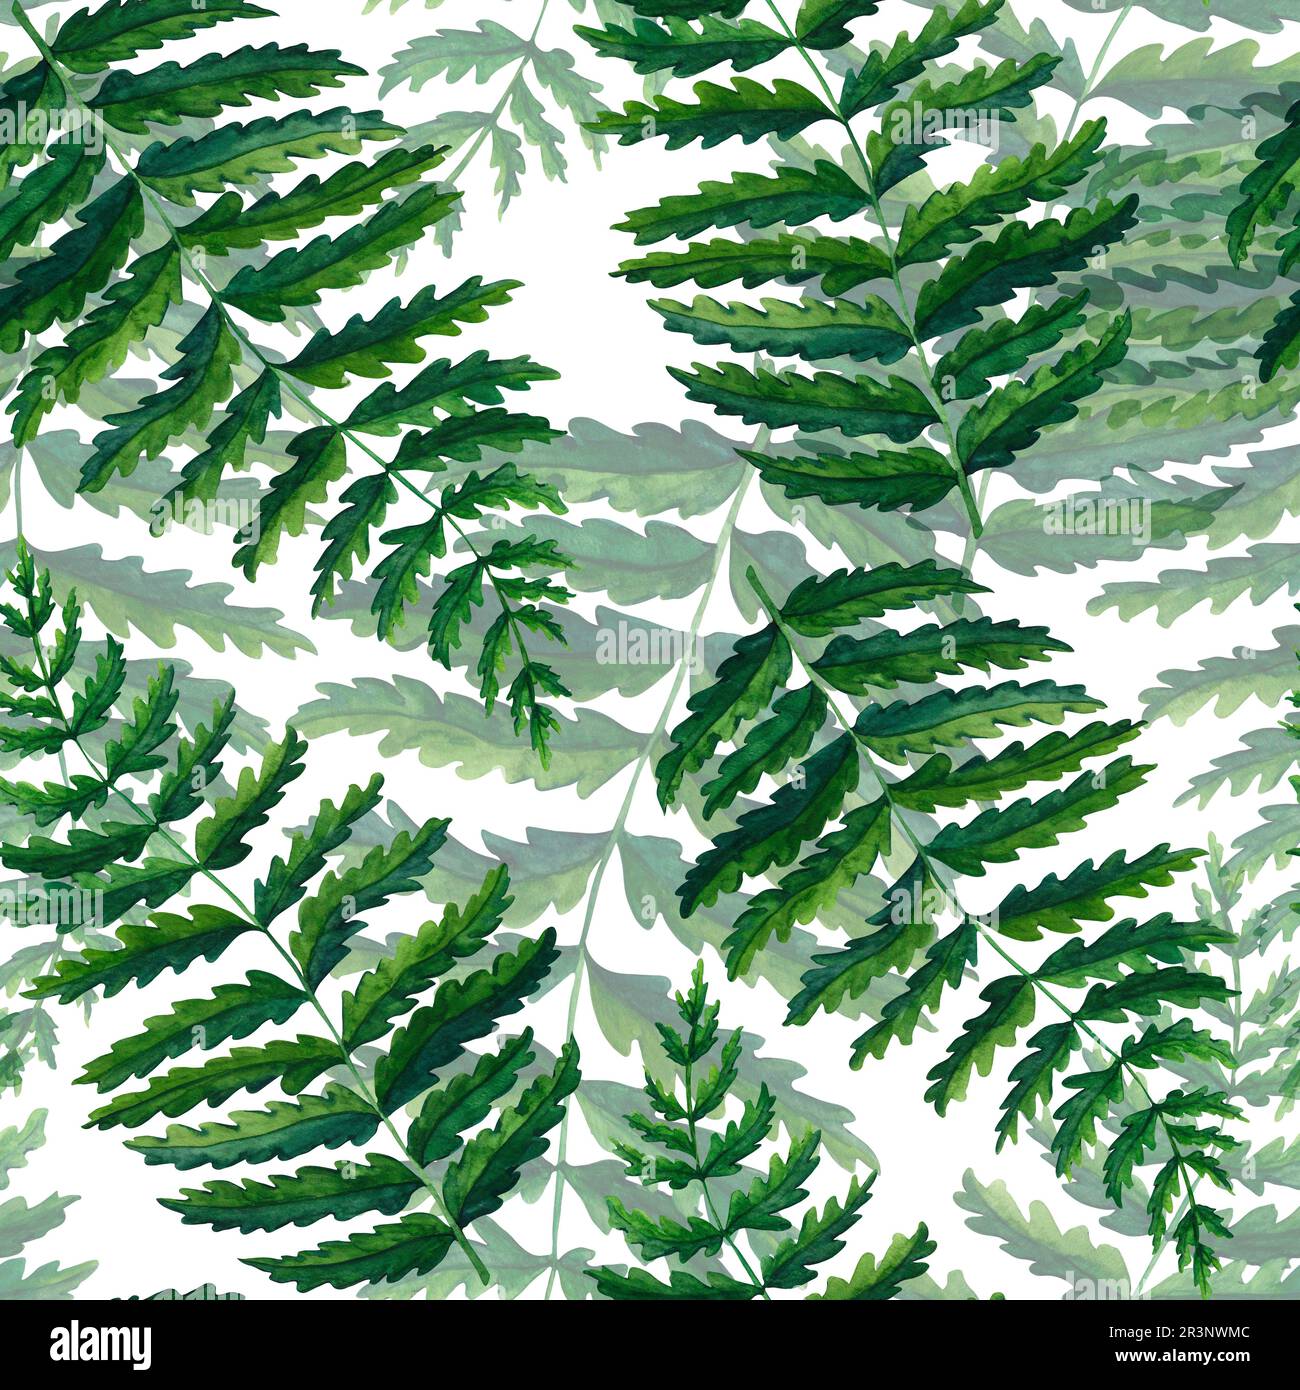 Seamless pattern fern watercolor hand painted illustration in green colors, greenery branch, twig, stem, forest plant isolated on white background for Stock Photo